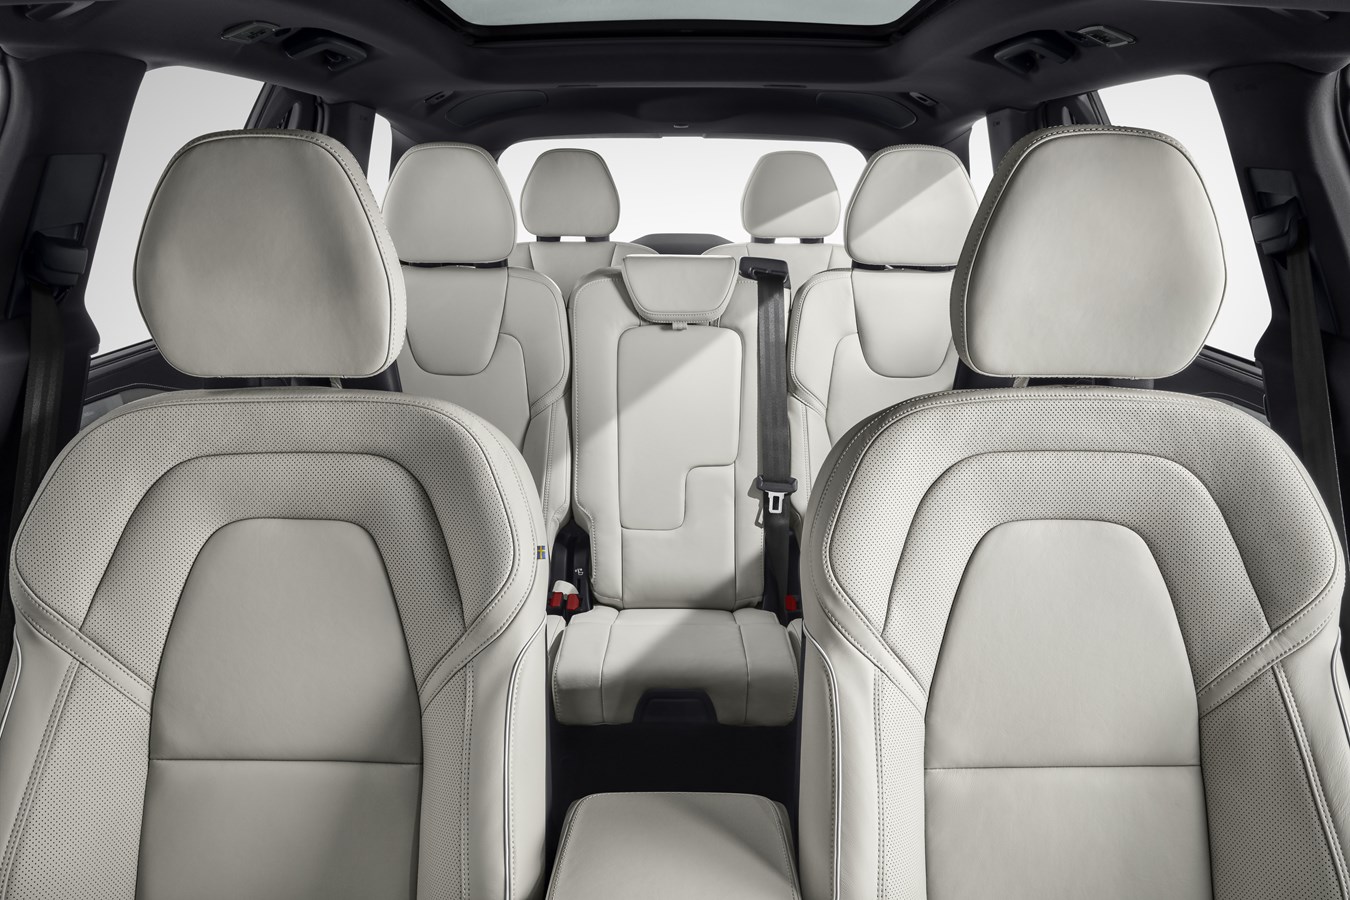 Seats in Volvo Cars Receive Exclusive Endorsement from American Chiropractic Association